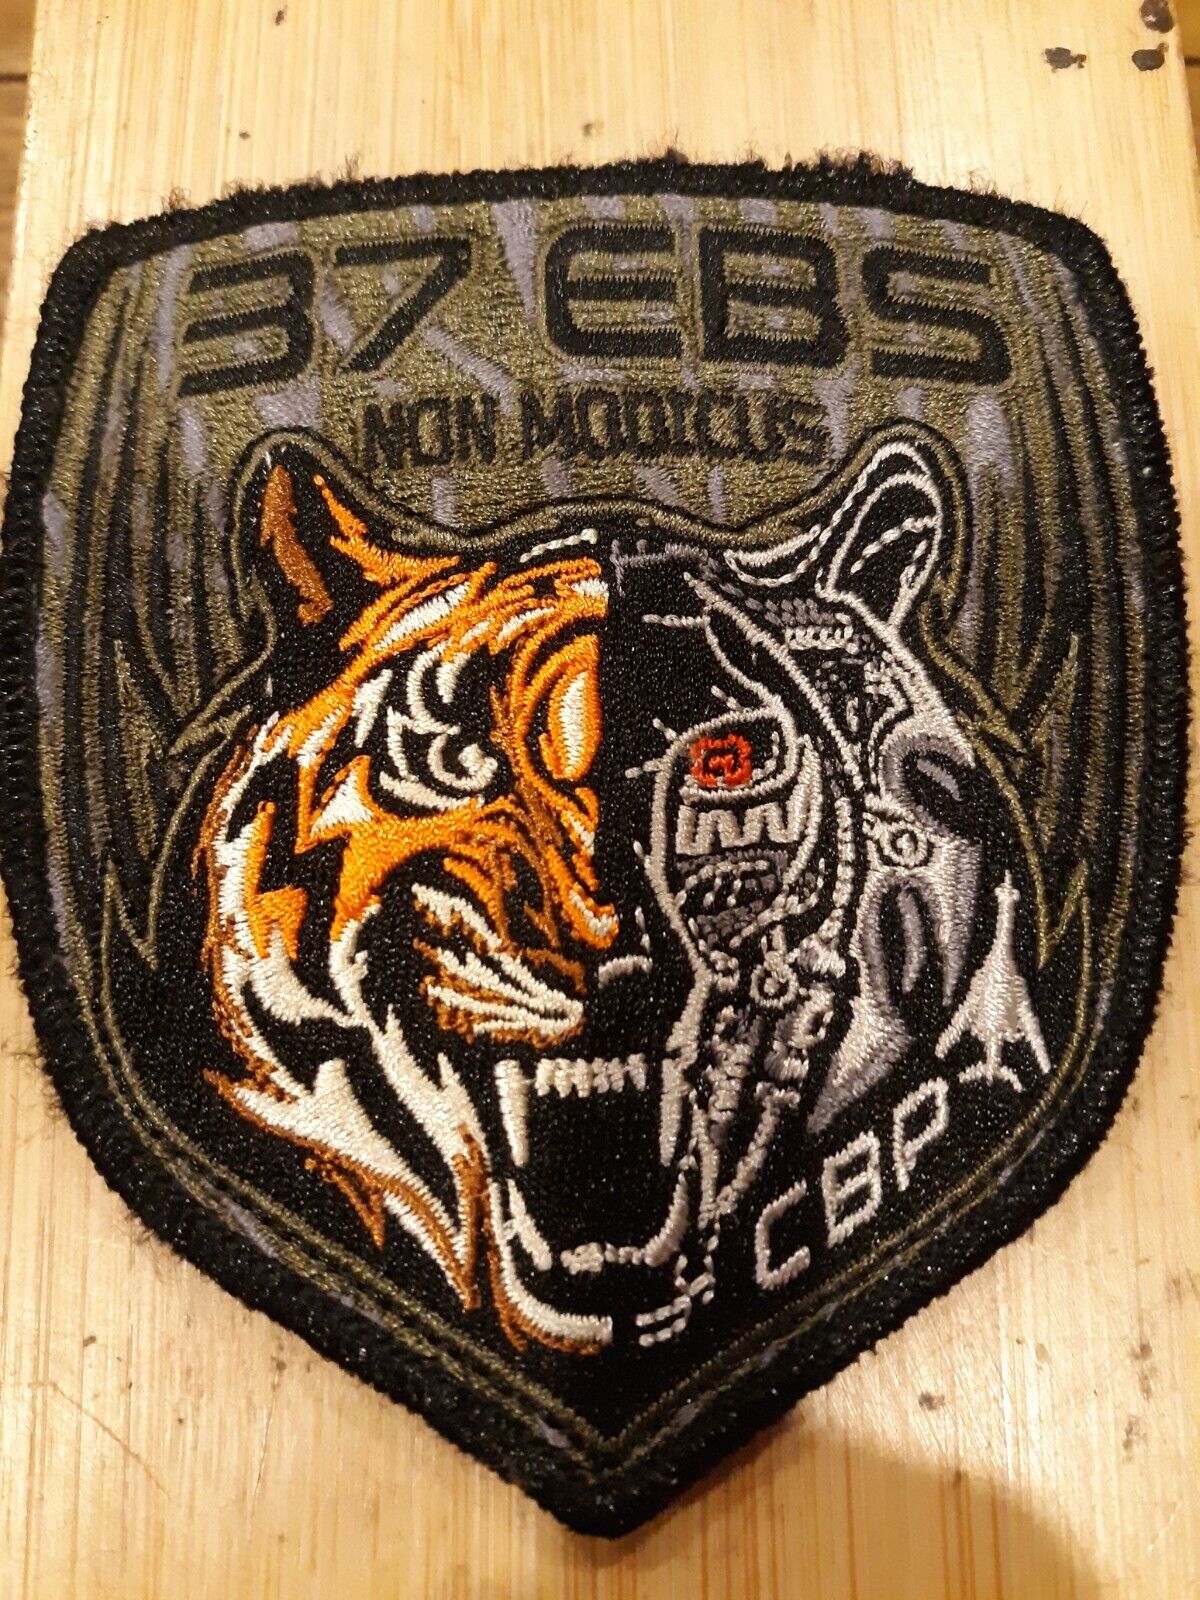 USAF patch 37th Expeditionary Bomb Squadron B-1 US Air Force Mecha-Tiger